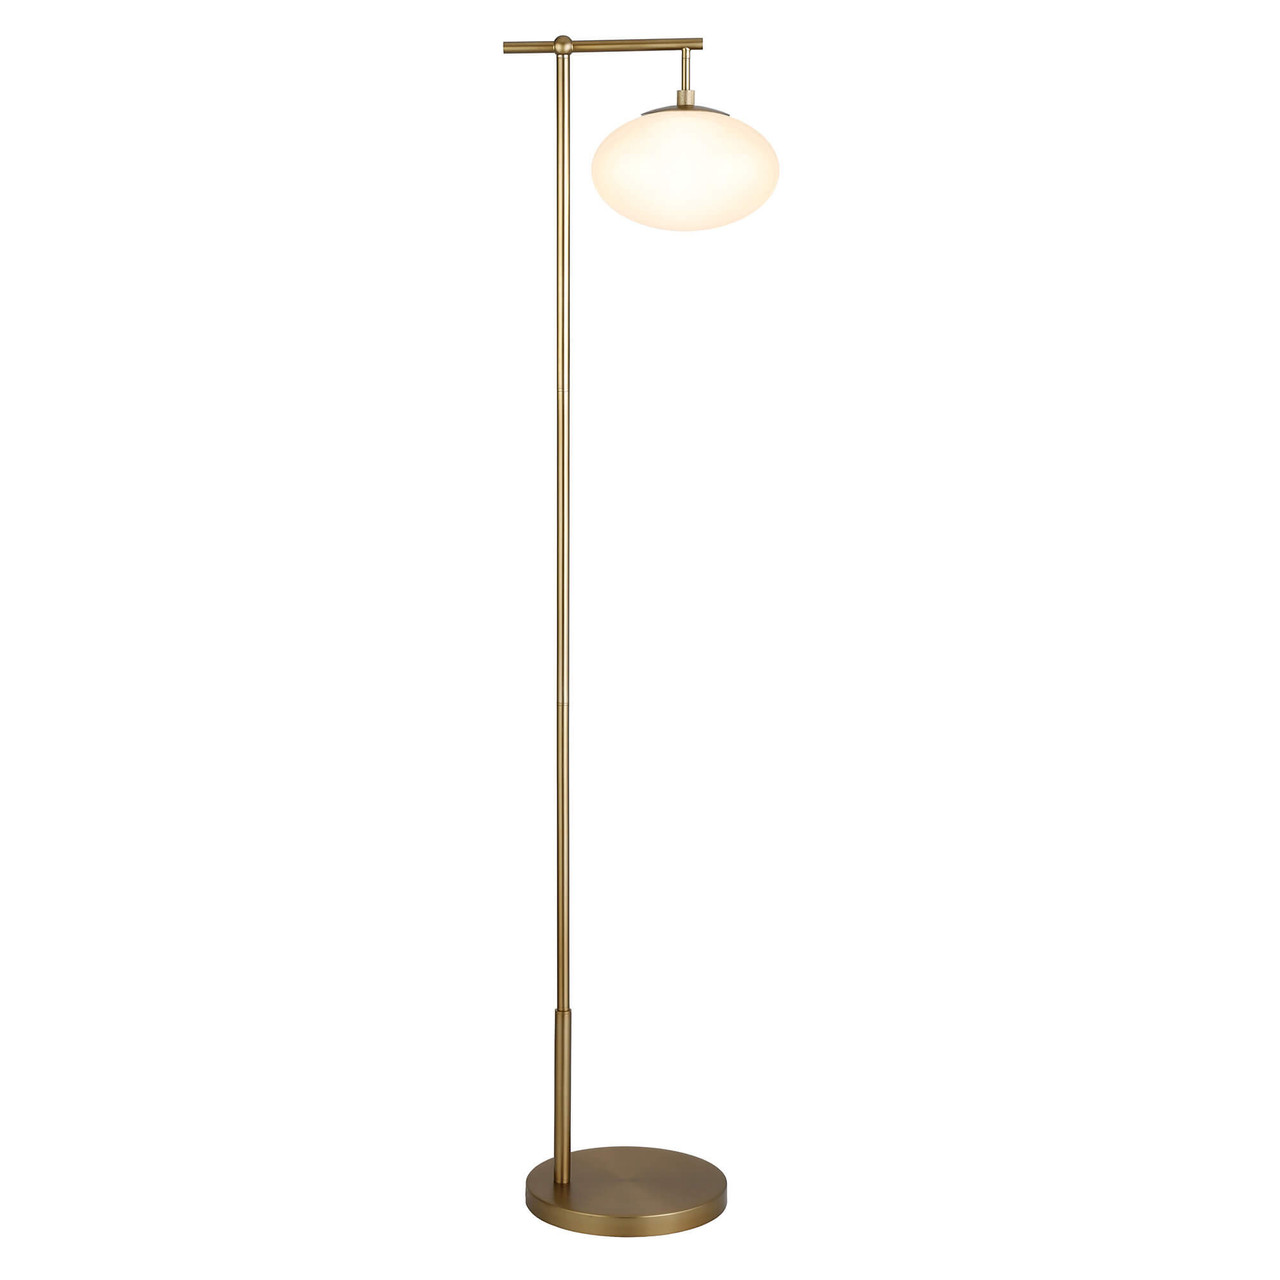 68" Brass Reading Floor Lamp With White Frosted Glass Globe Shade - Chicken Pieces